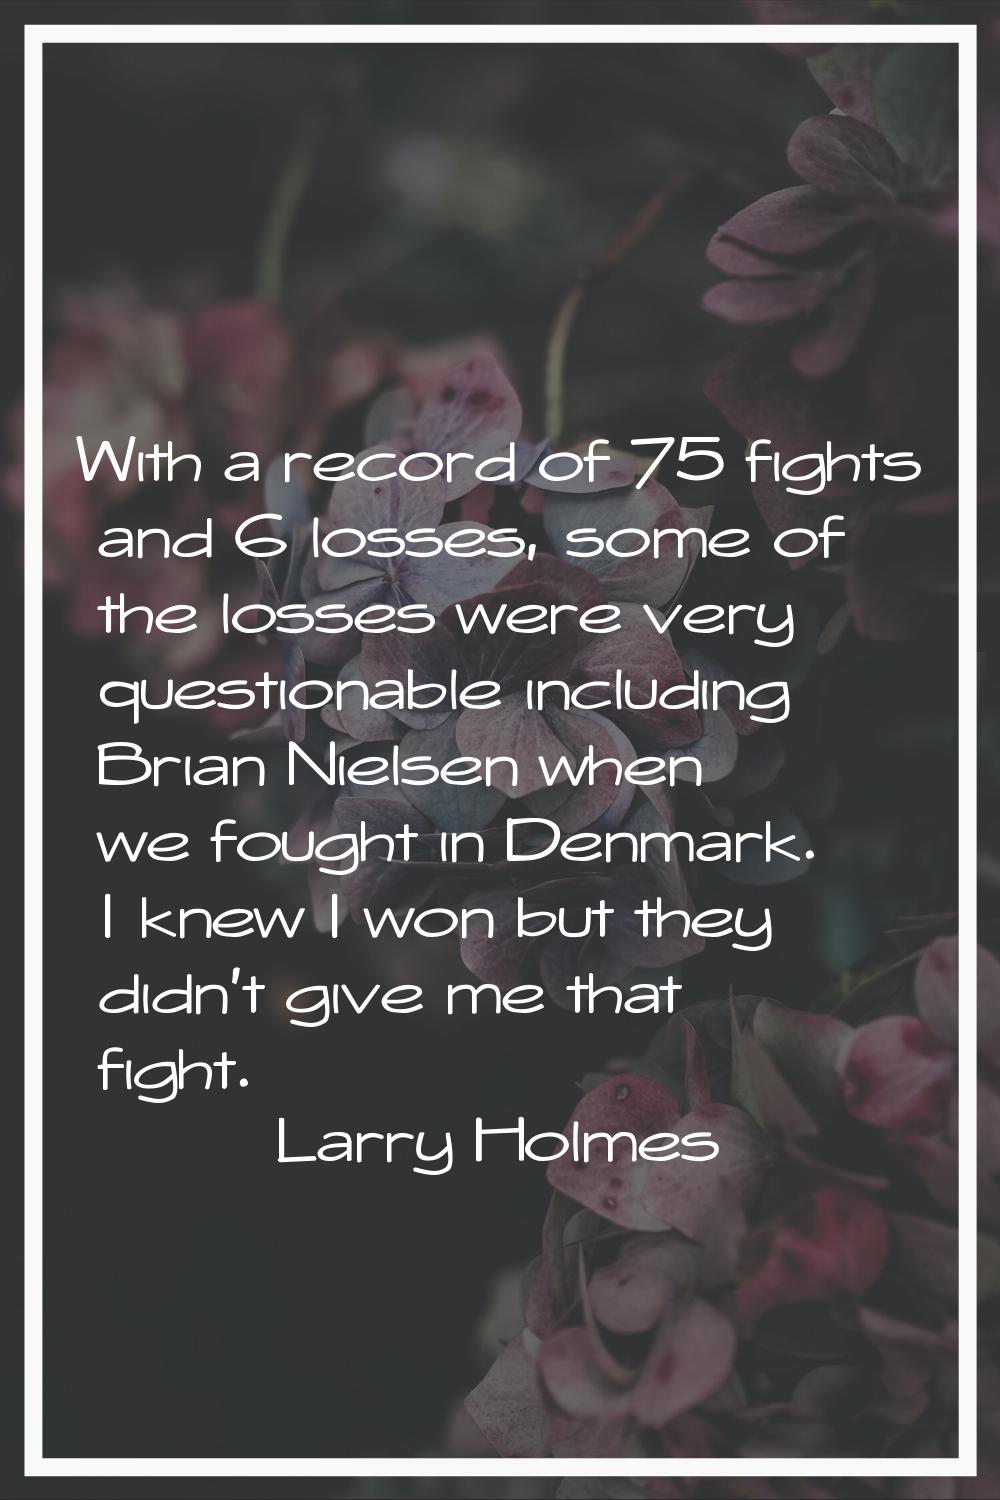 With a record of 75 fights and 6 losses, some of the losses were very questionable including Brian 